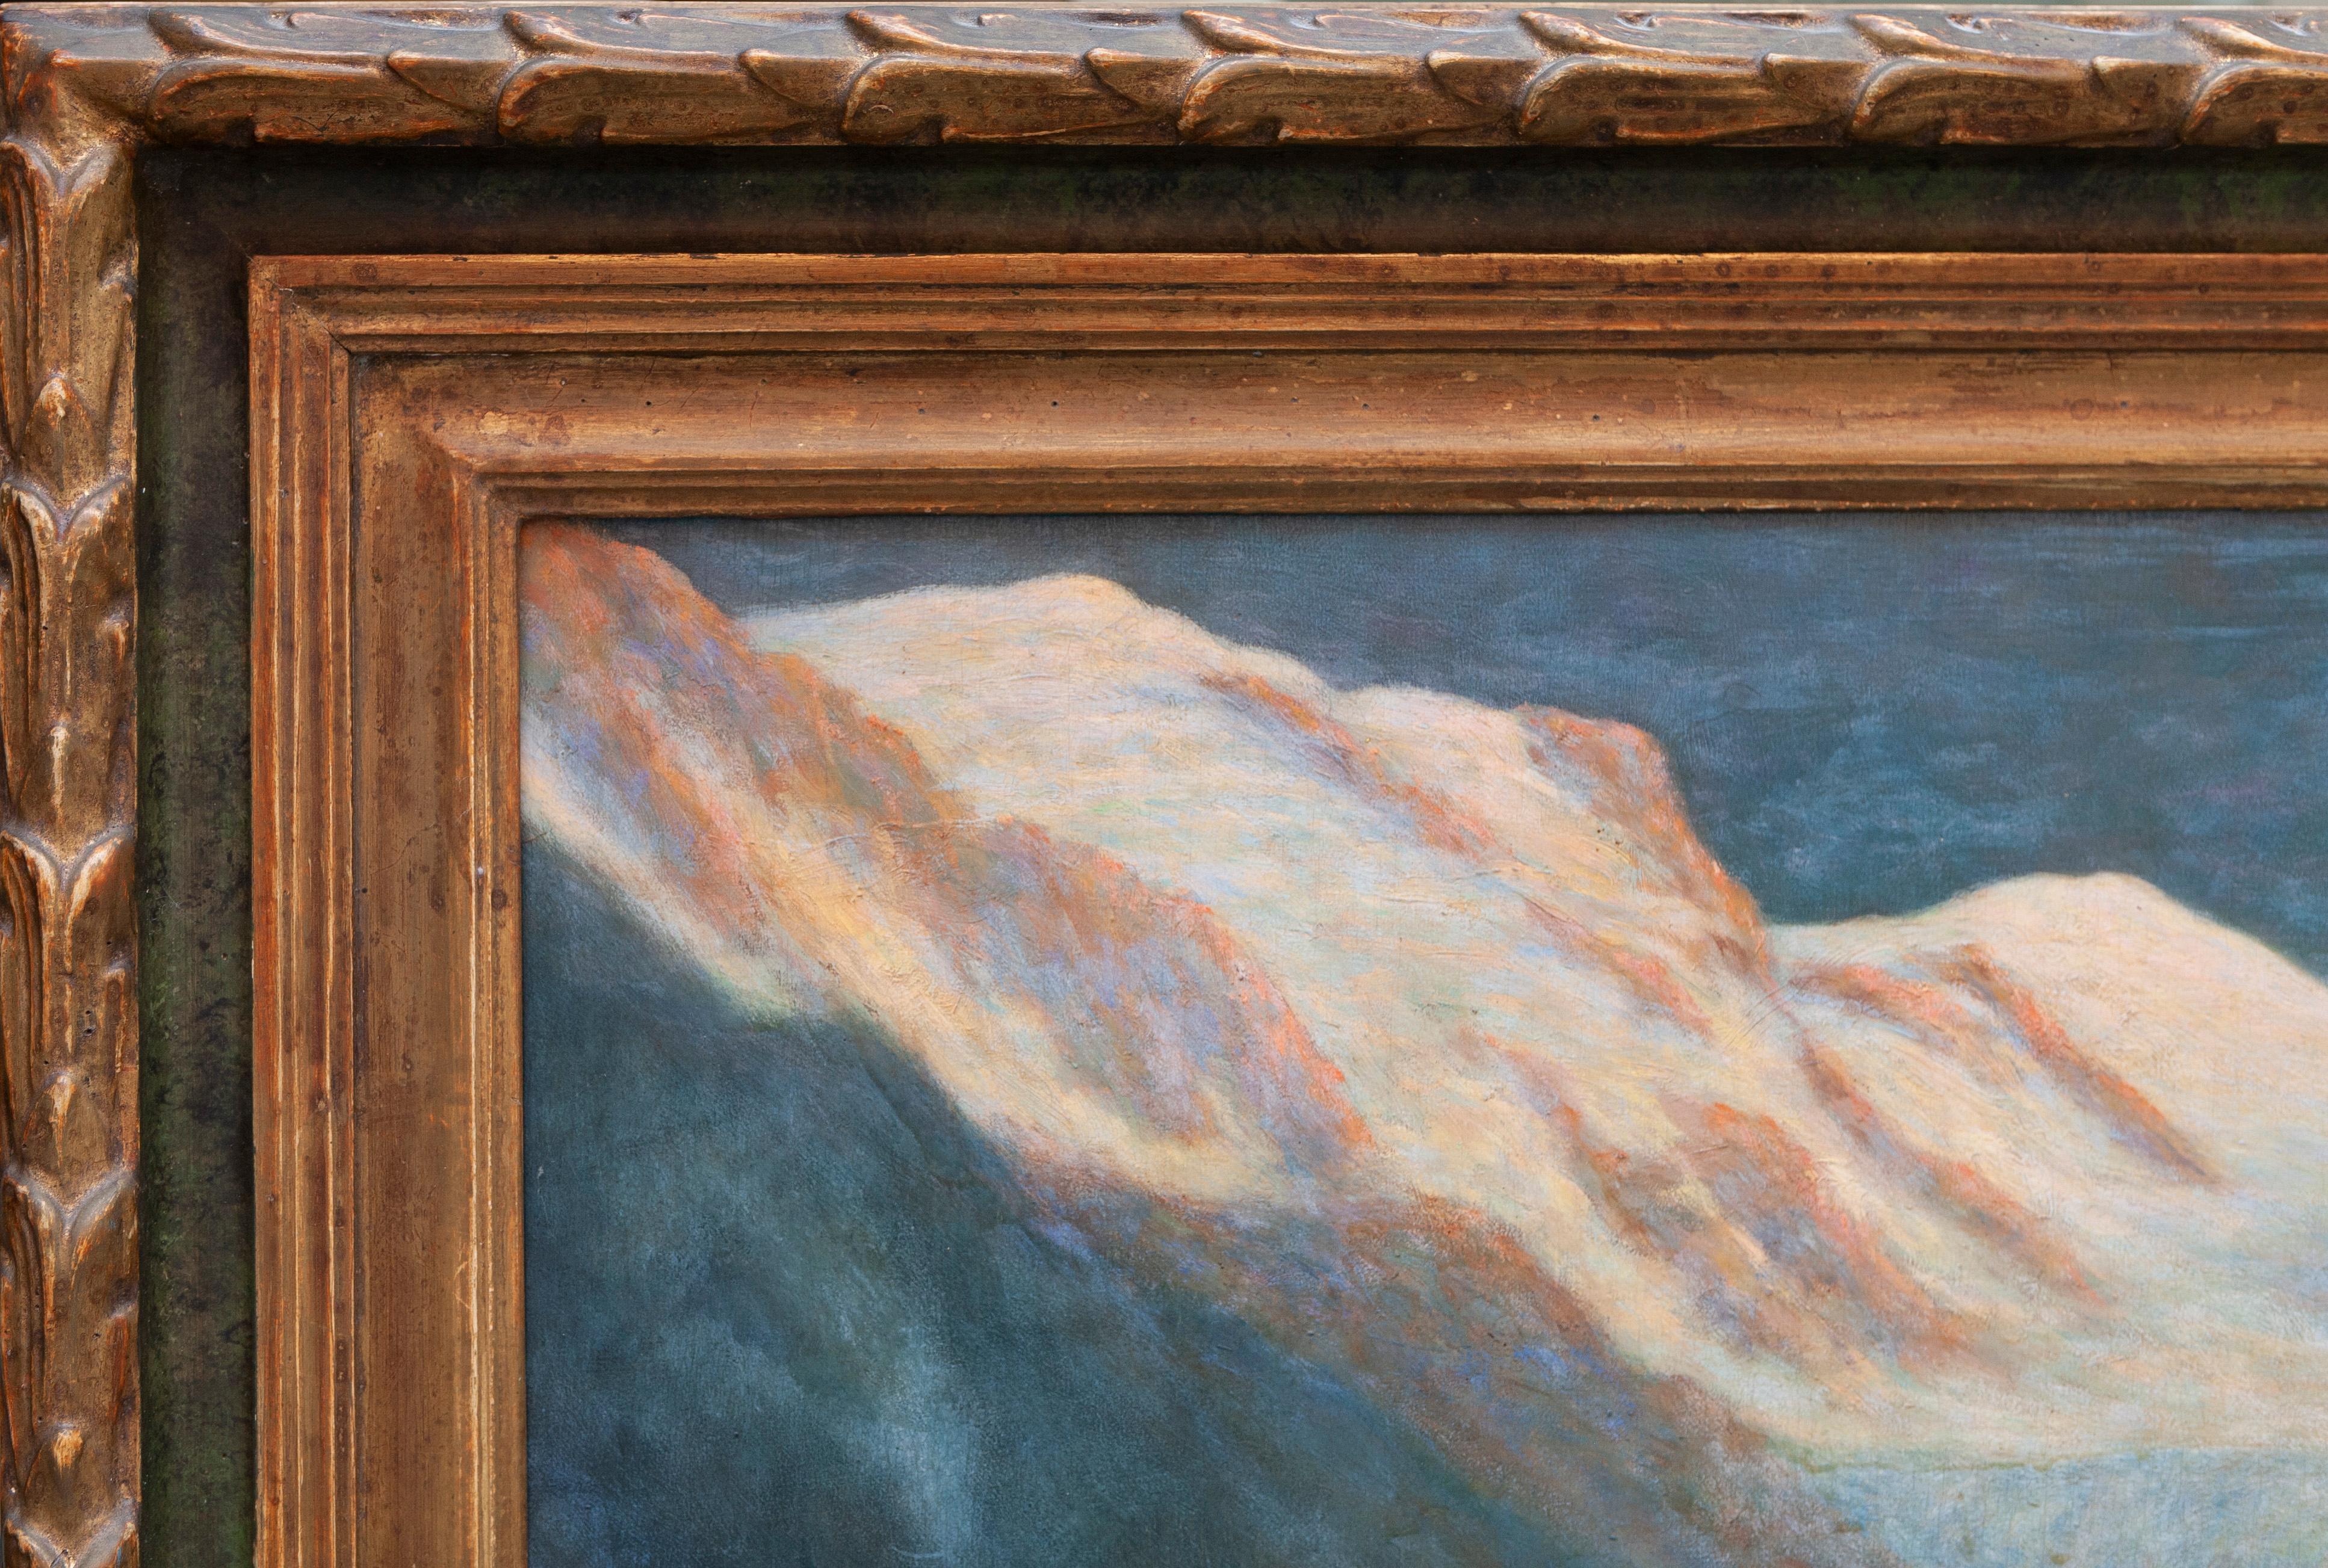 Giacinto Trussardi (1881-1947)

Mont Blanc Massif
Oil on panel in lacquered frame
Size: 80x122 cm (97x138 cm including the frame)
1st quarter 20th century

The back label bears this inscription: 
